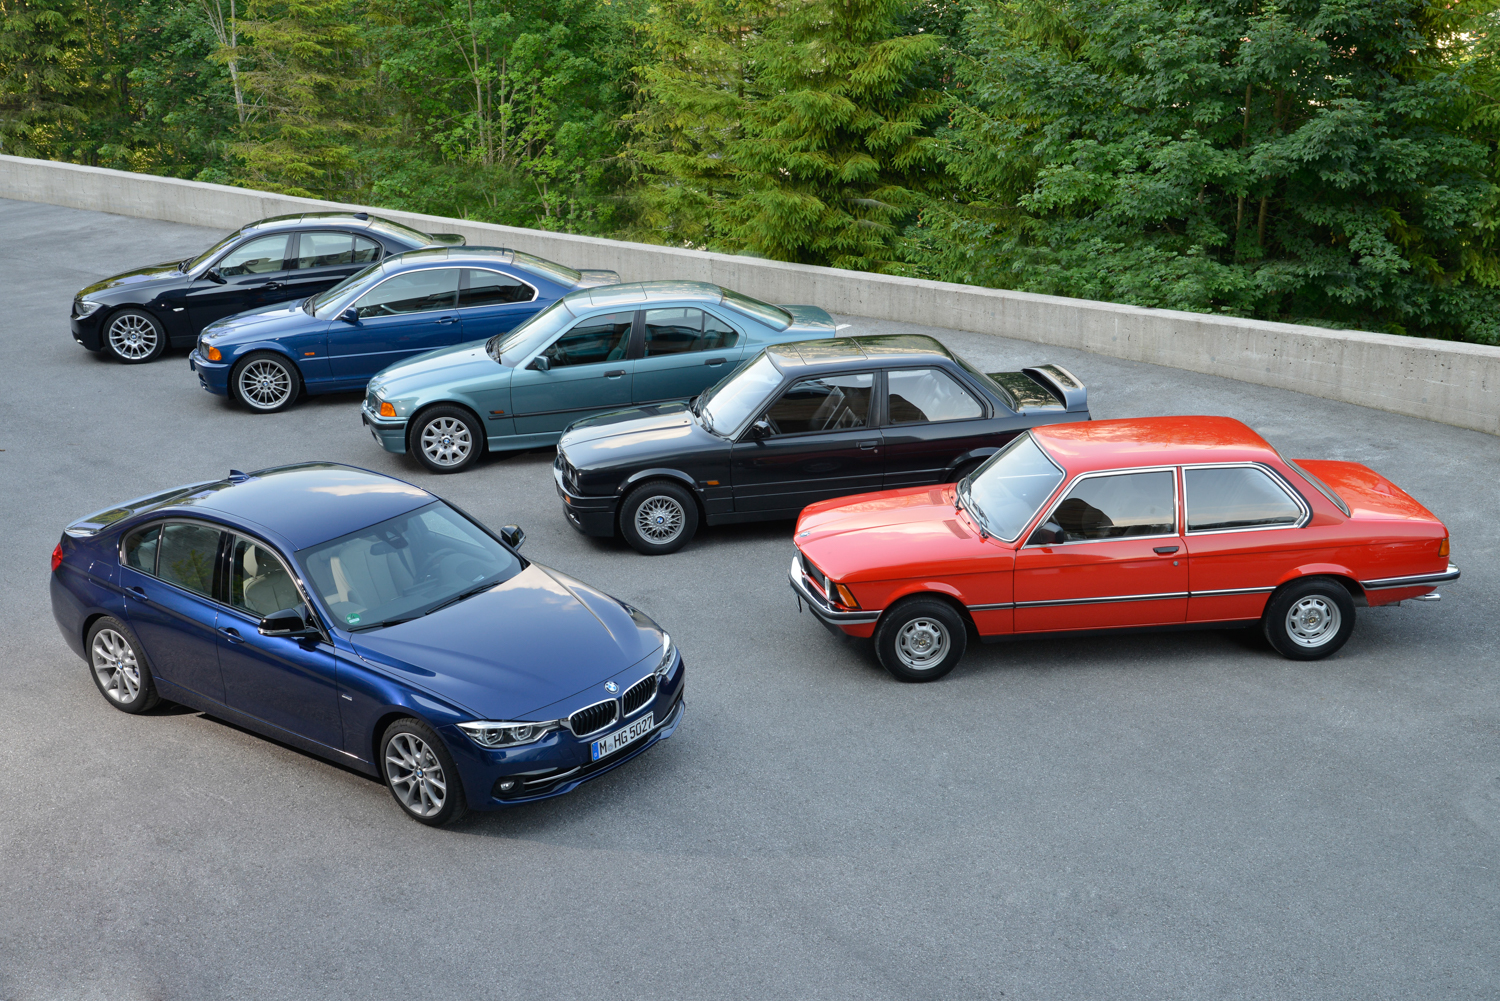 BMW 3 Series: 40 years old, and still the ultimate driving machine